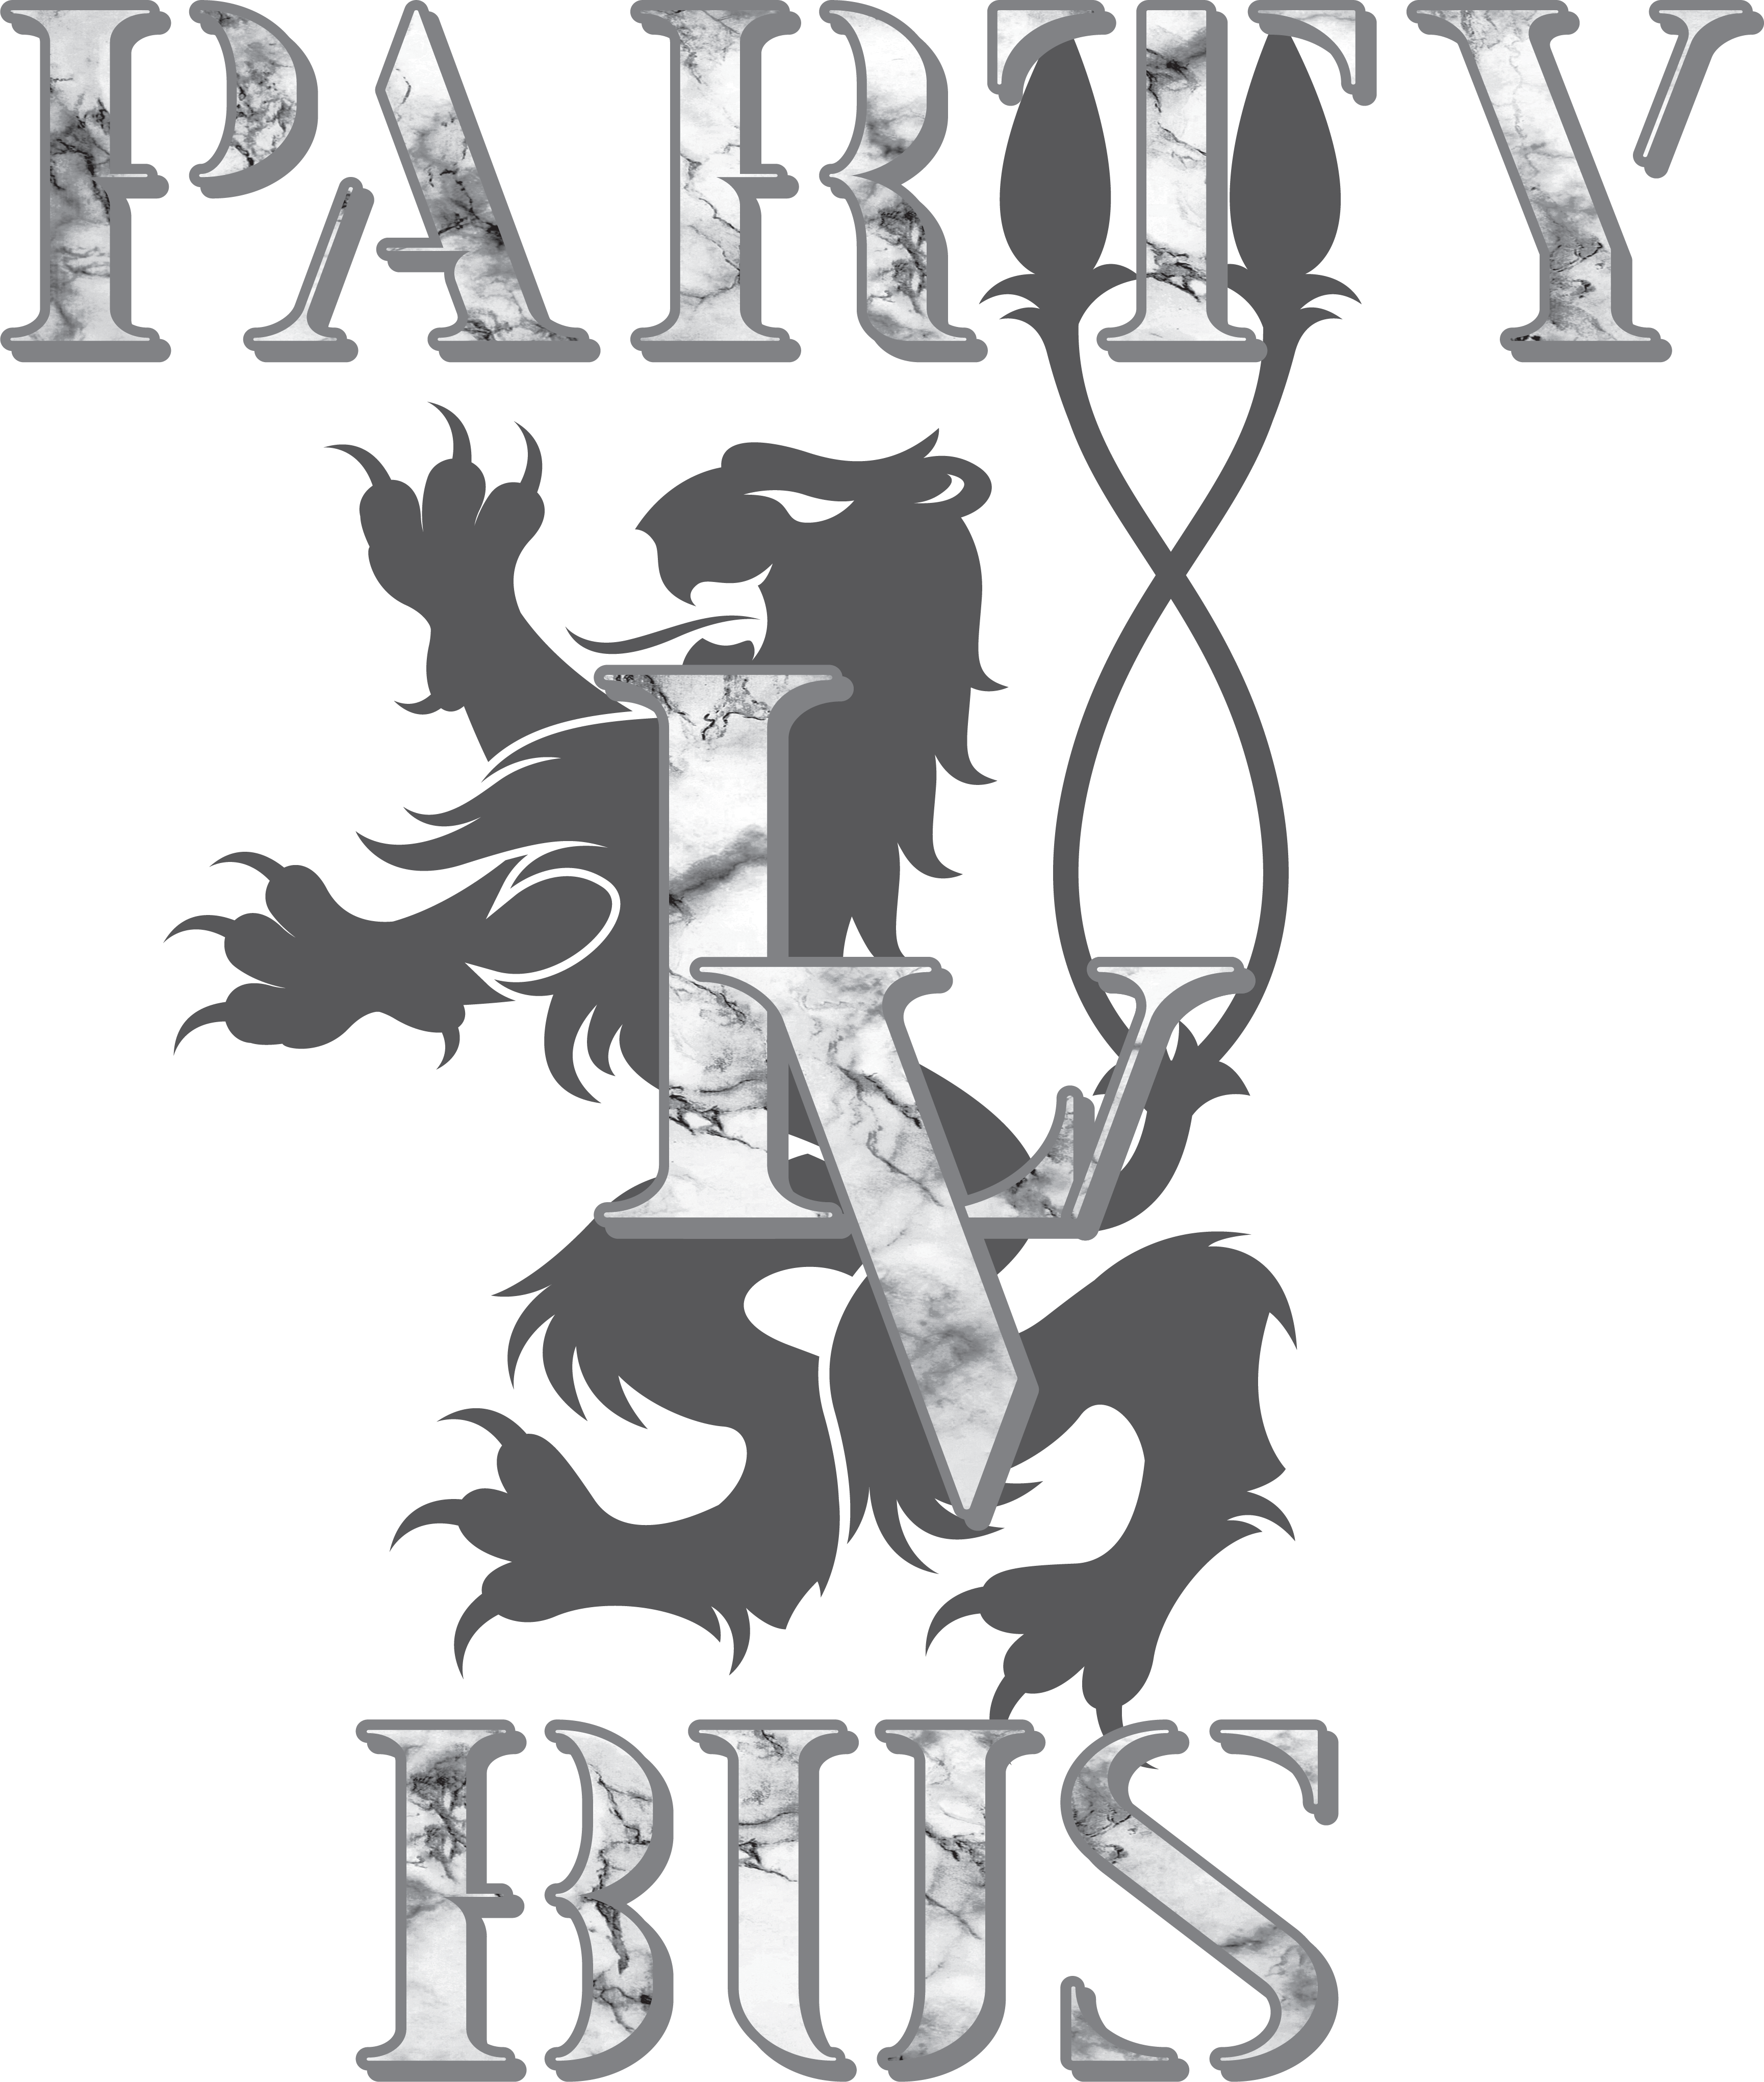 Party Bus Las Vegas LLC Highlights the Benefits of Hiring a Party Bus